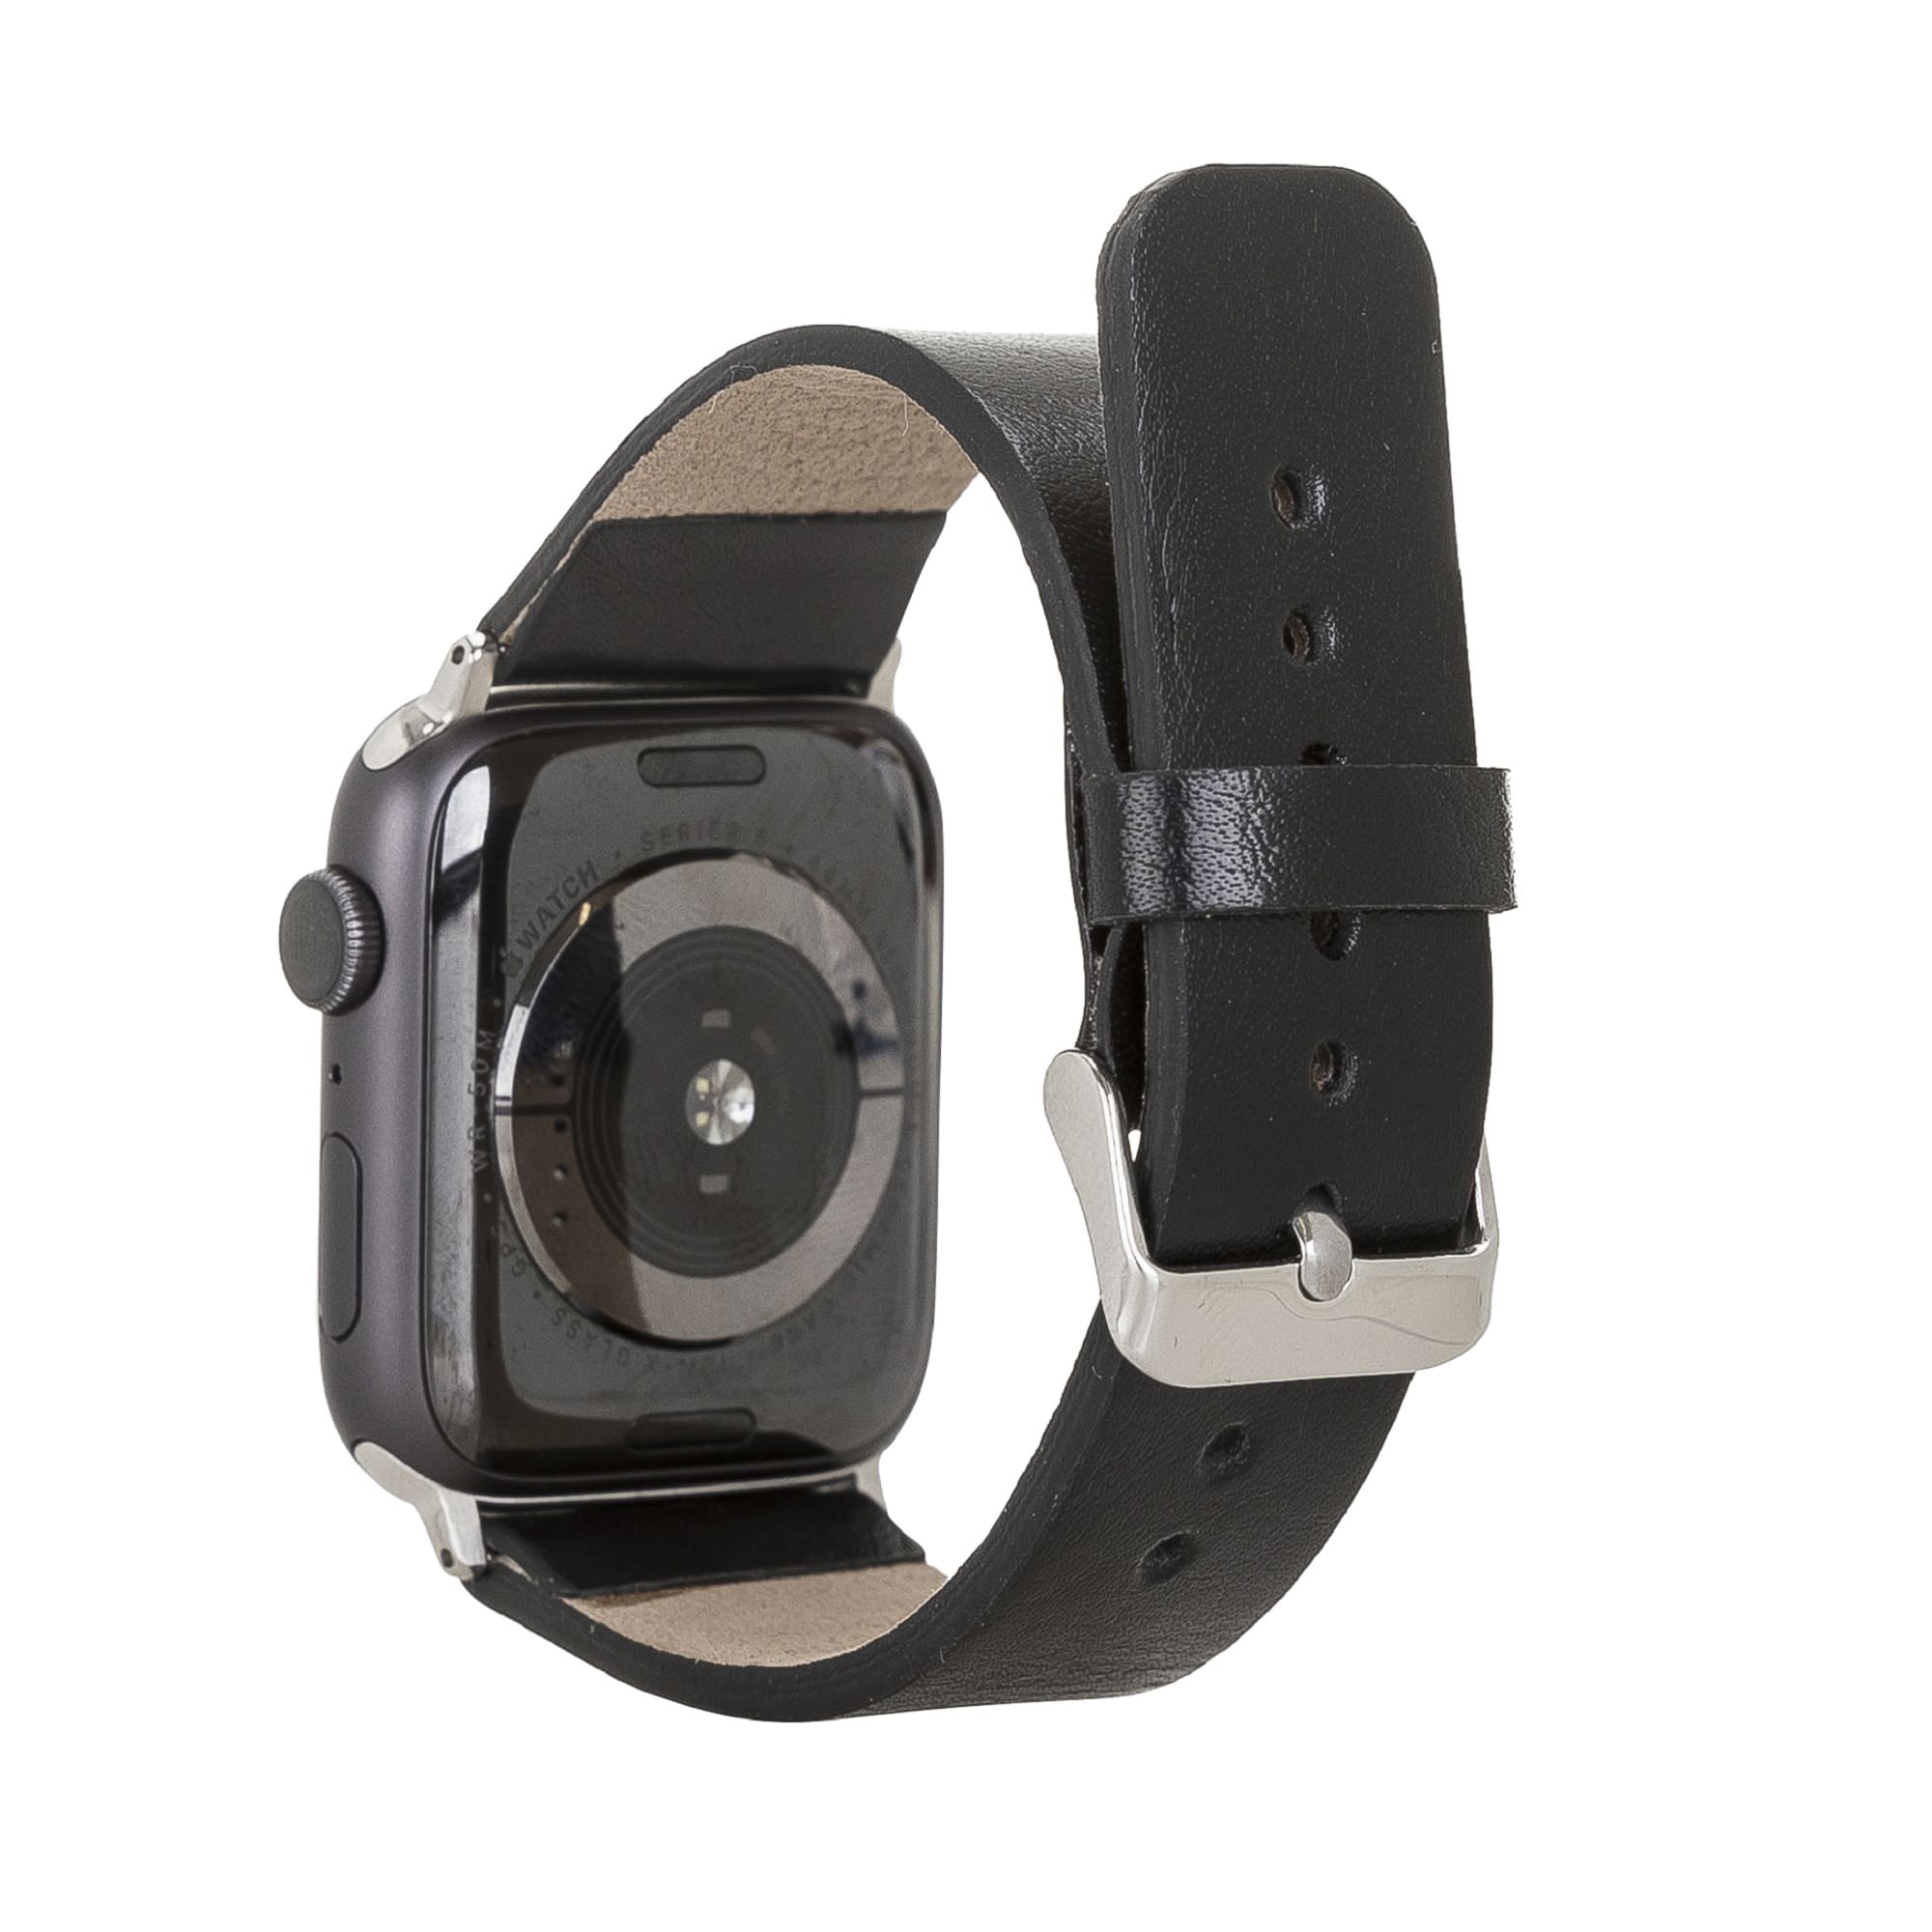 Cambridge Black Genuine Leather Apple Watch Band Strap 38mm 40mm 42mm 44mm 45mm for All Series - Bomonti - 2